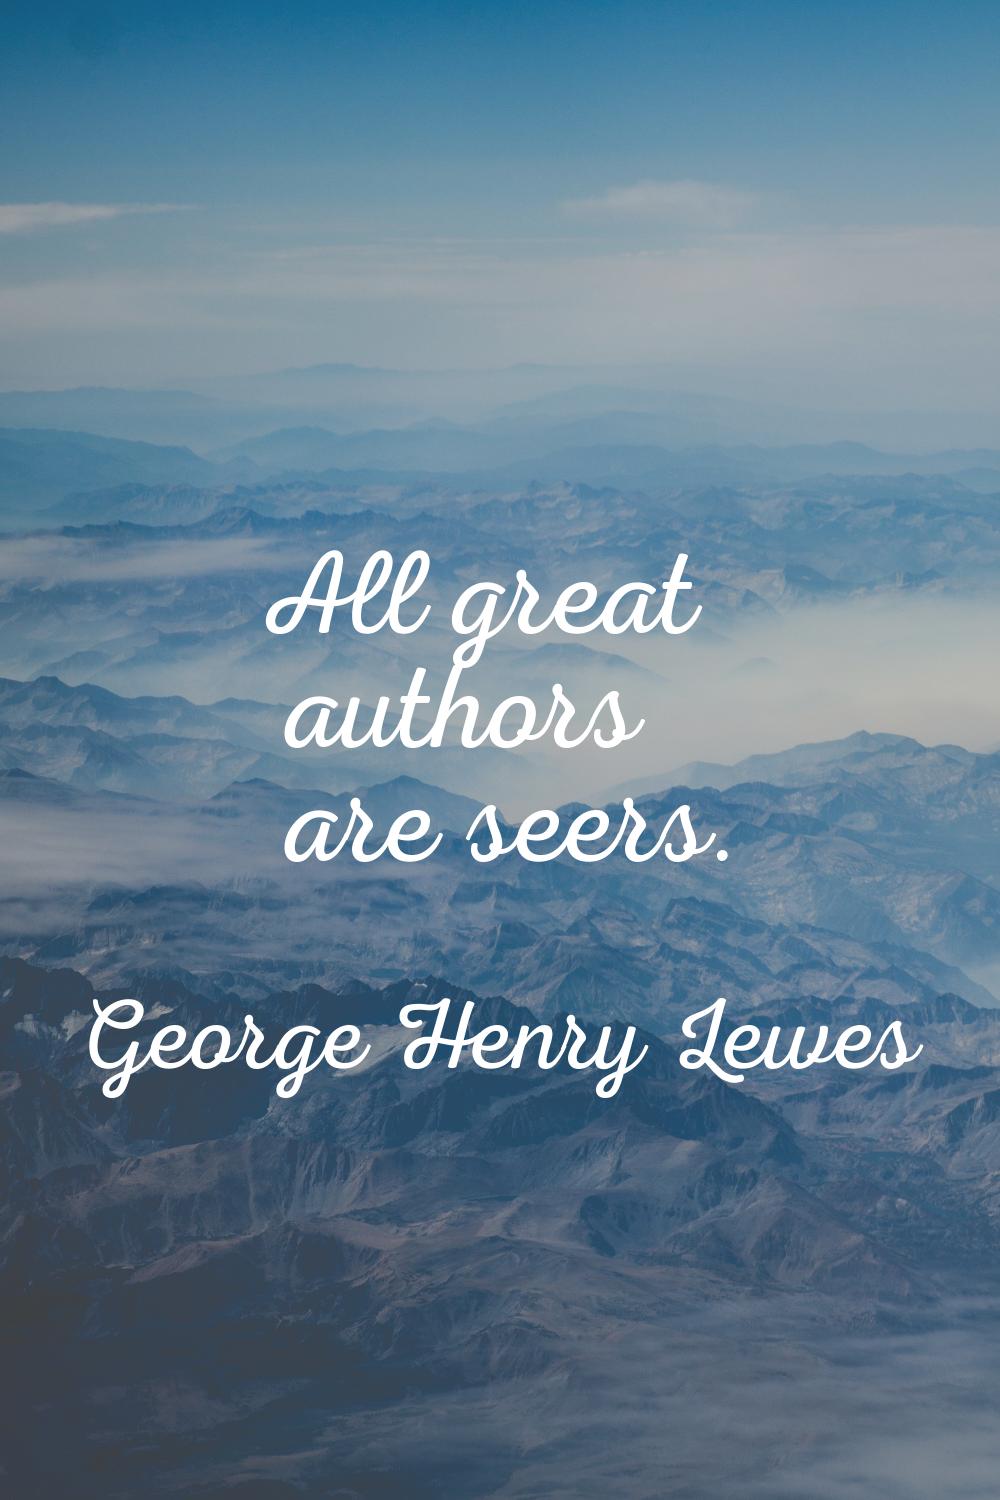 All great authors are seers.